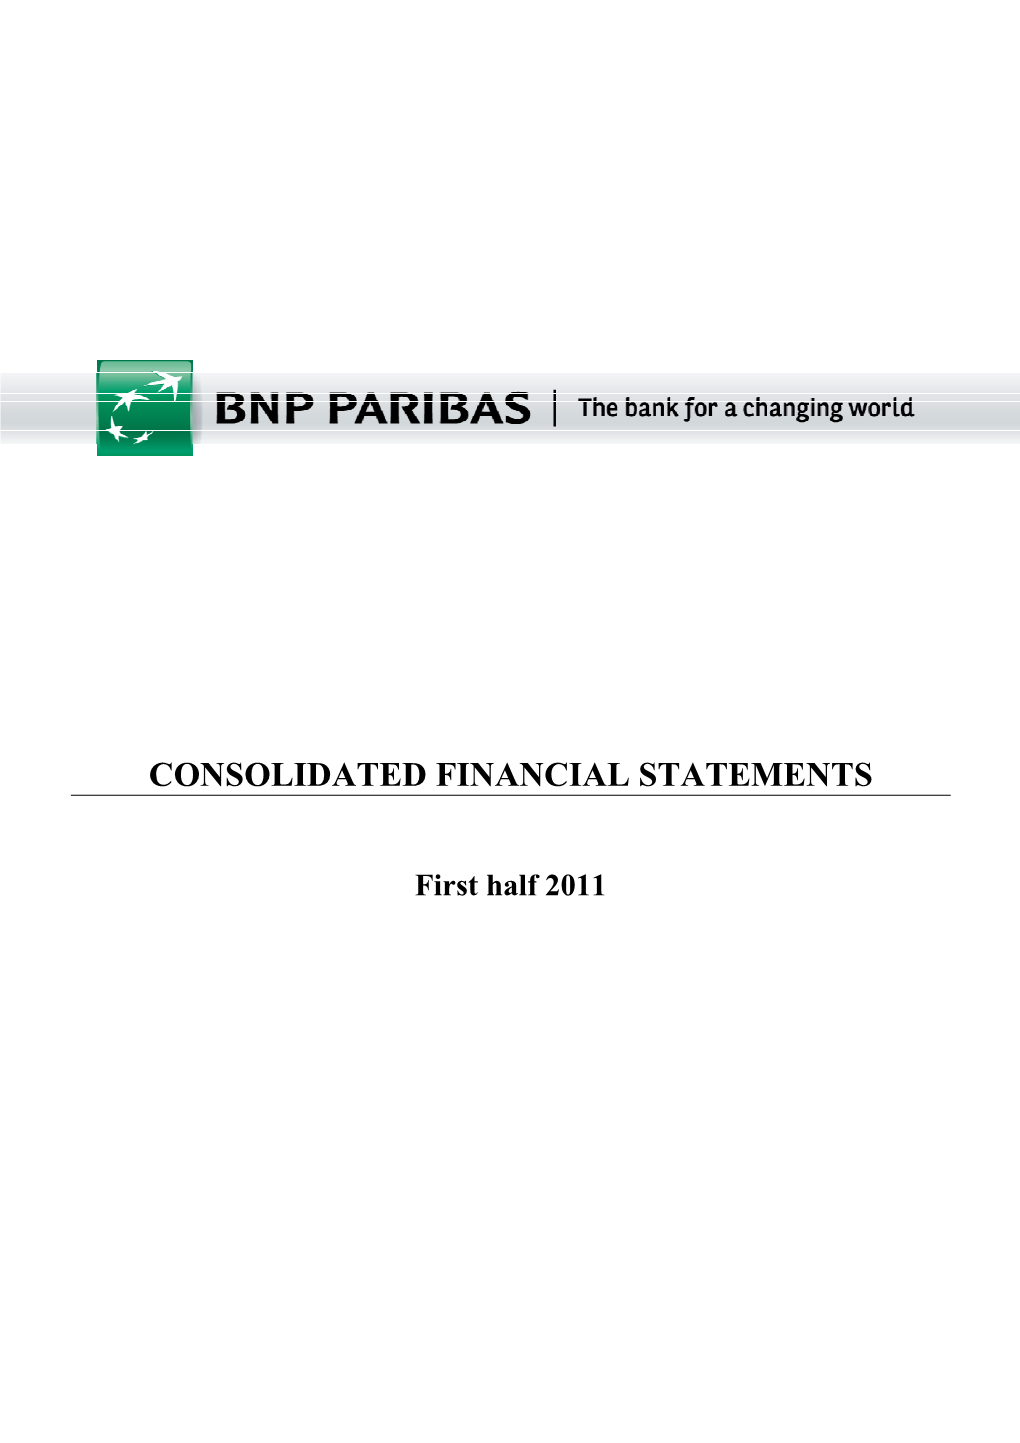 Consolidated Financial Statements